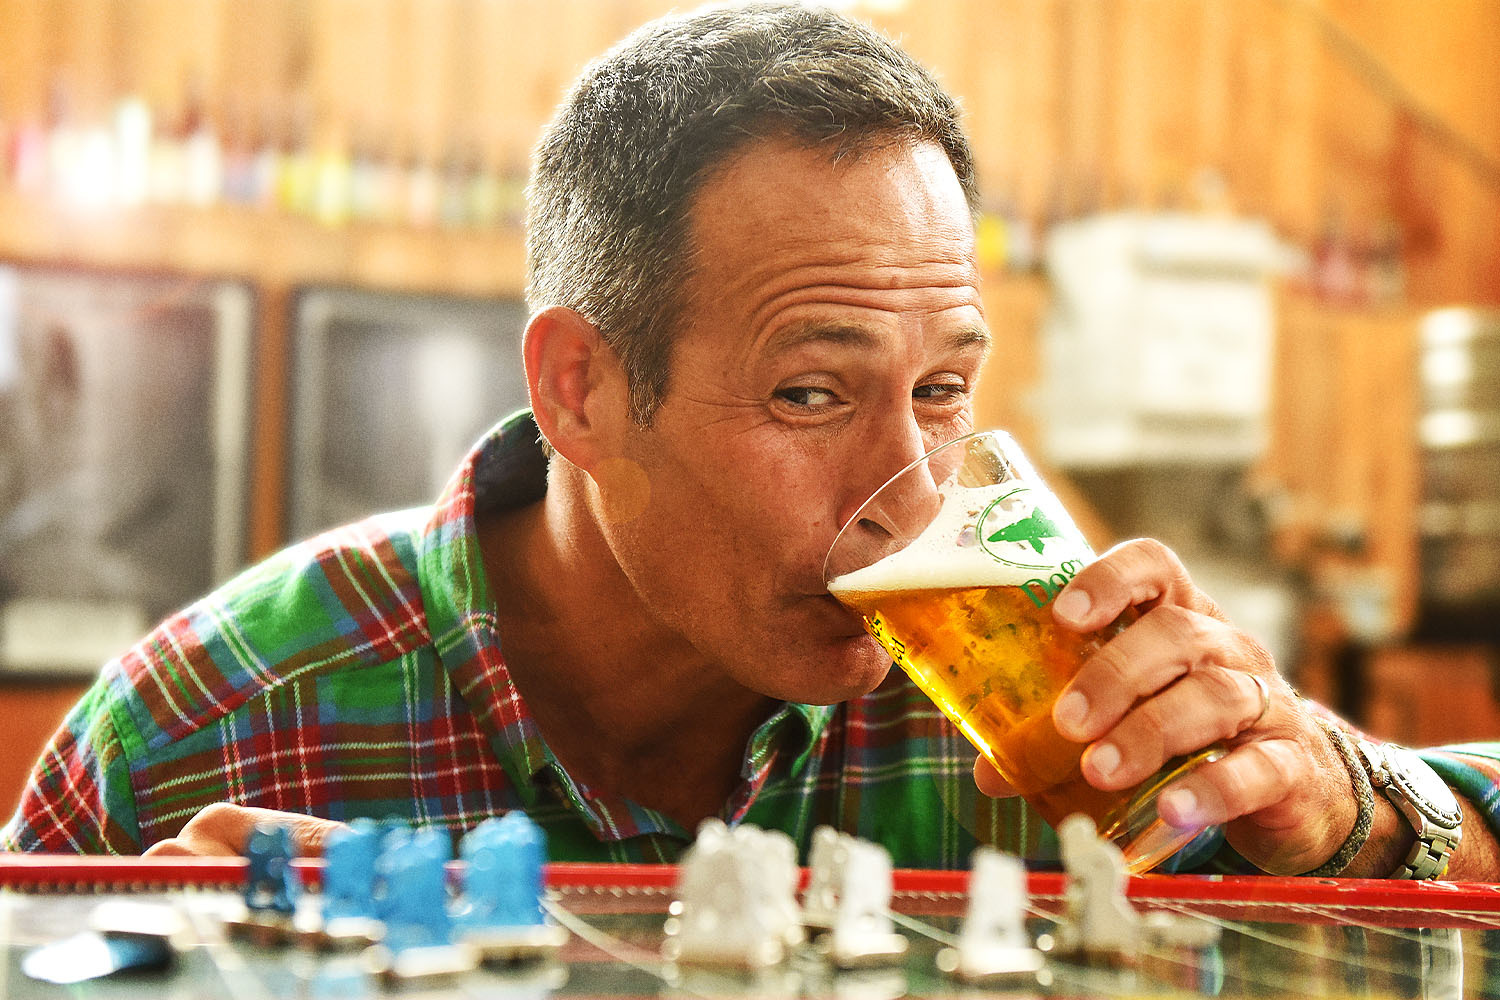 The Future of Craft Beer, According to Dogfish Head’s Sam Calagione